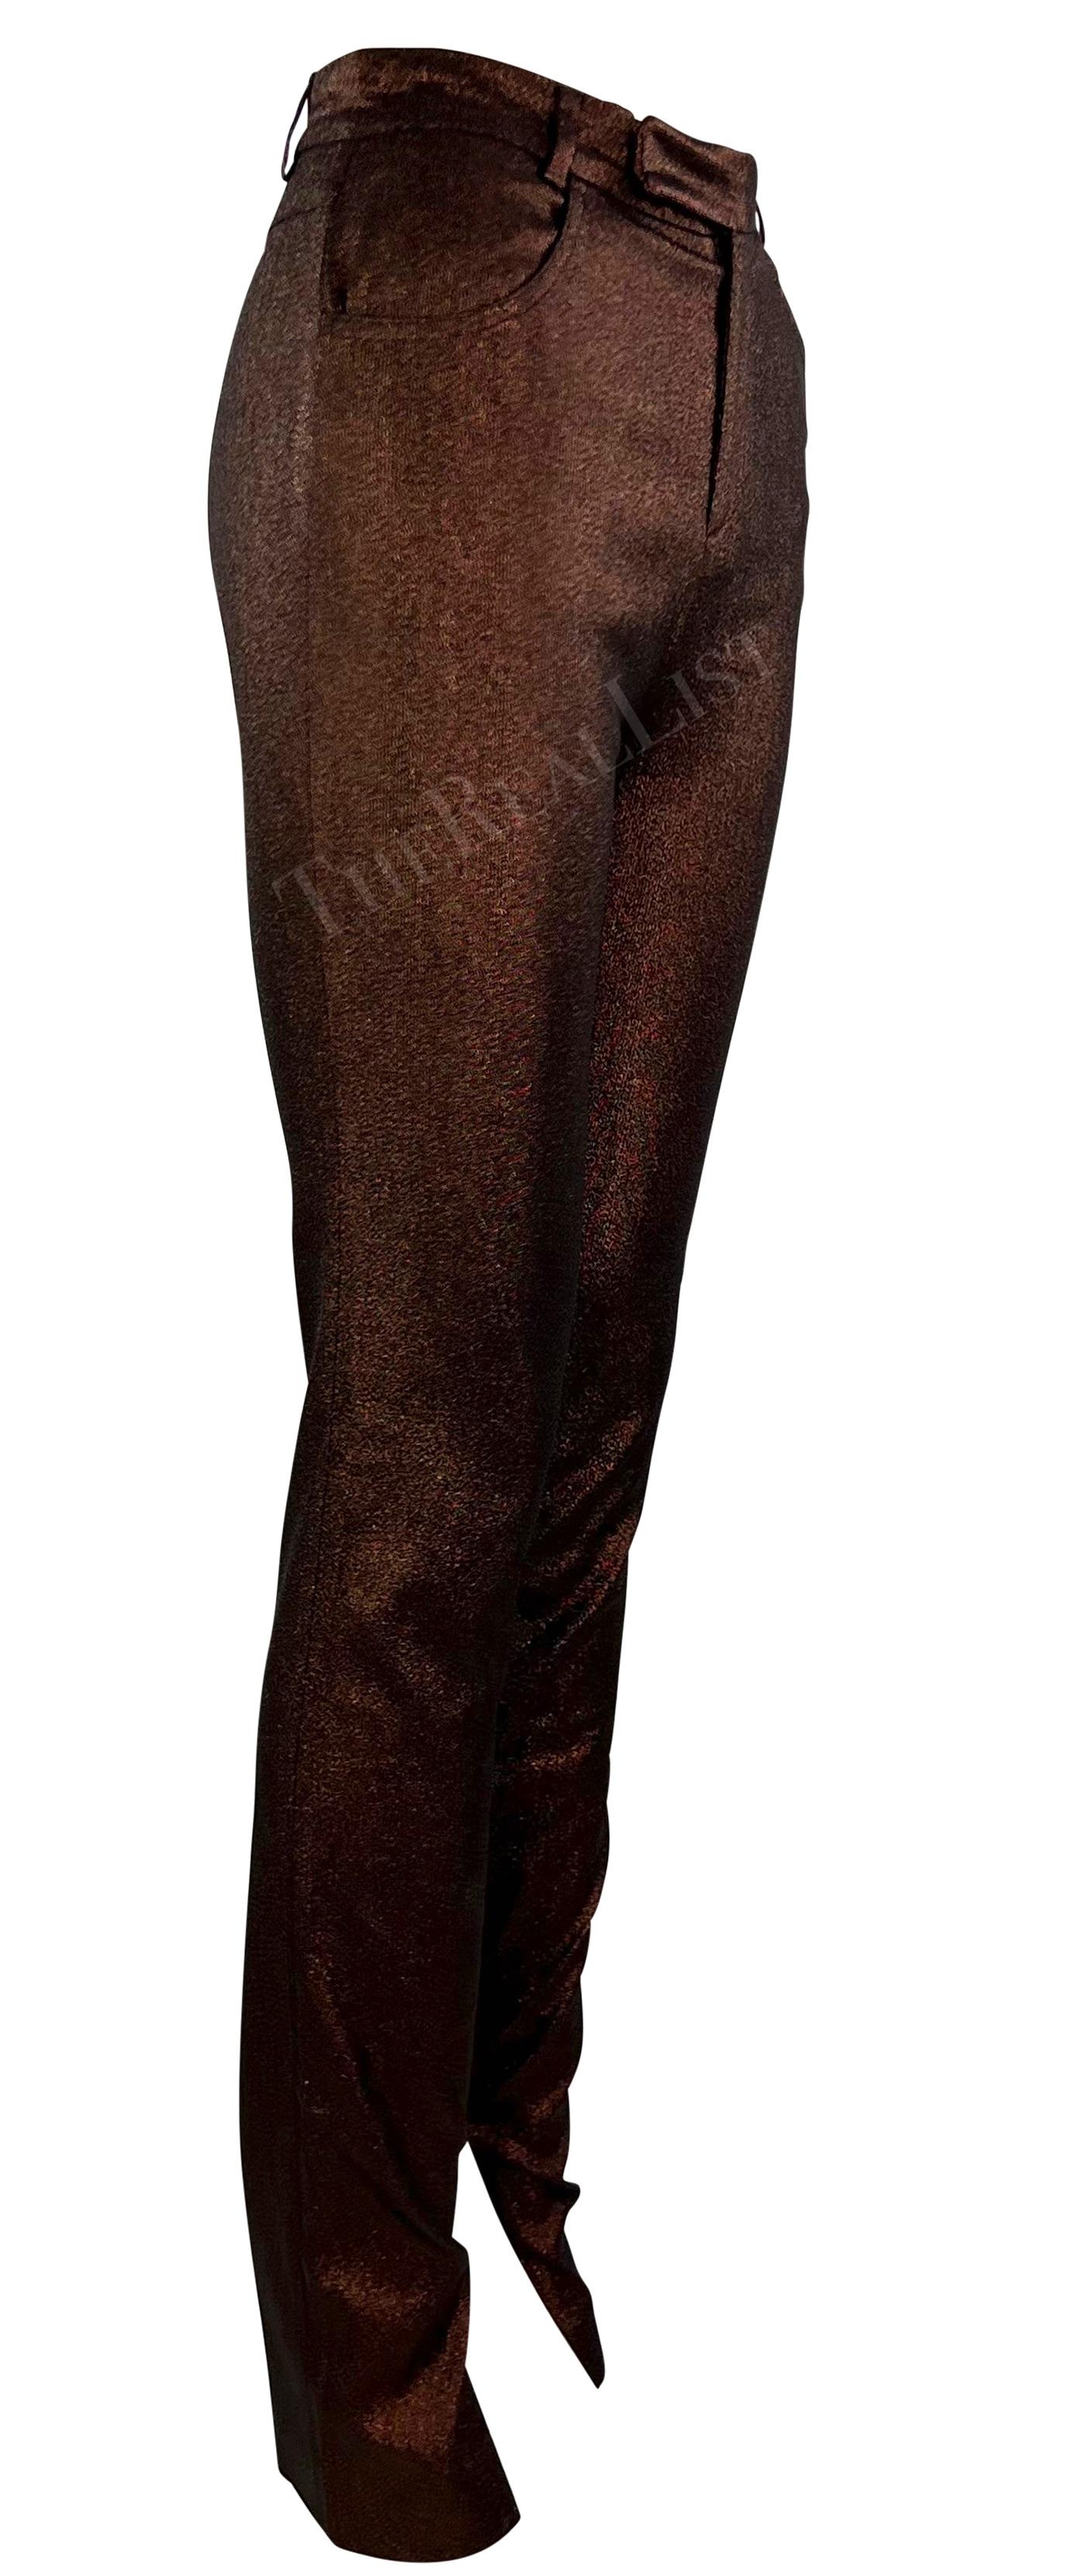 S/S 1997 Gucci by Tom Ford Runway Ad Copper Metallic Skinny Lurex Stretch Pants For Sale 7